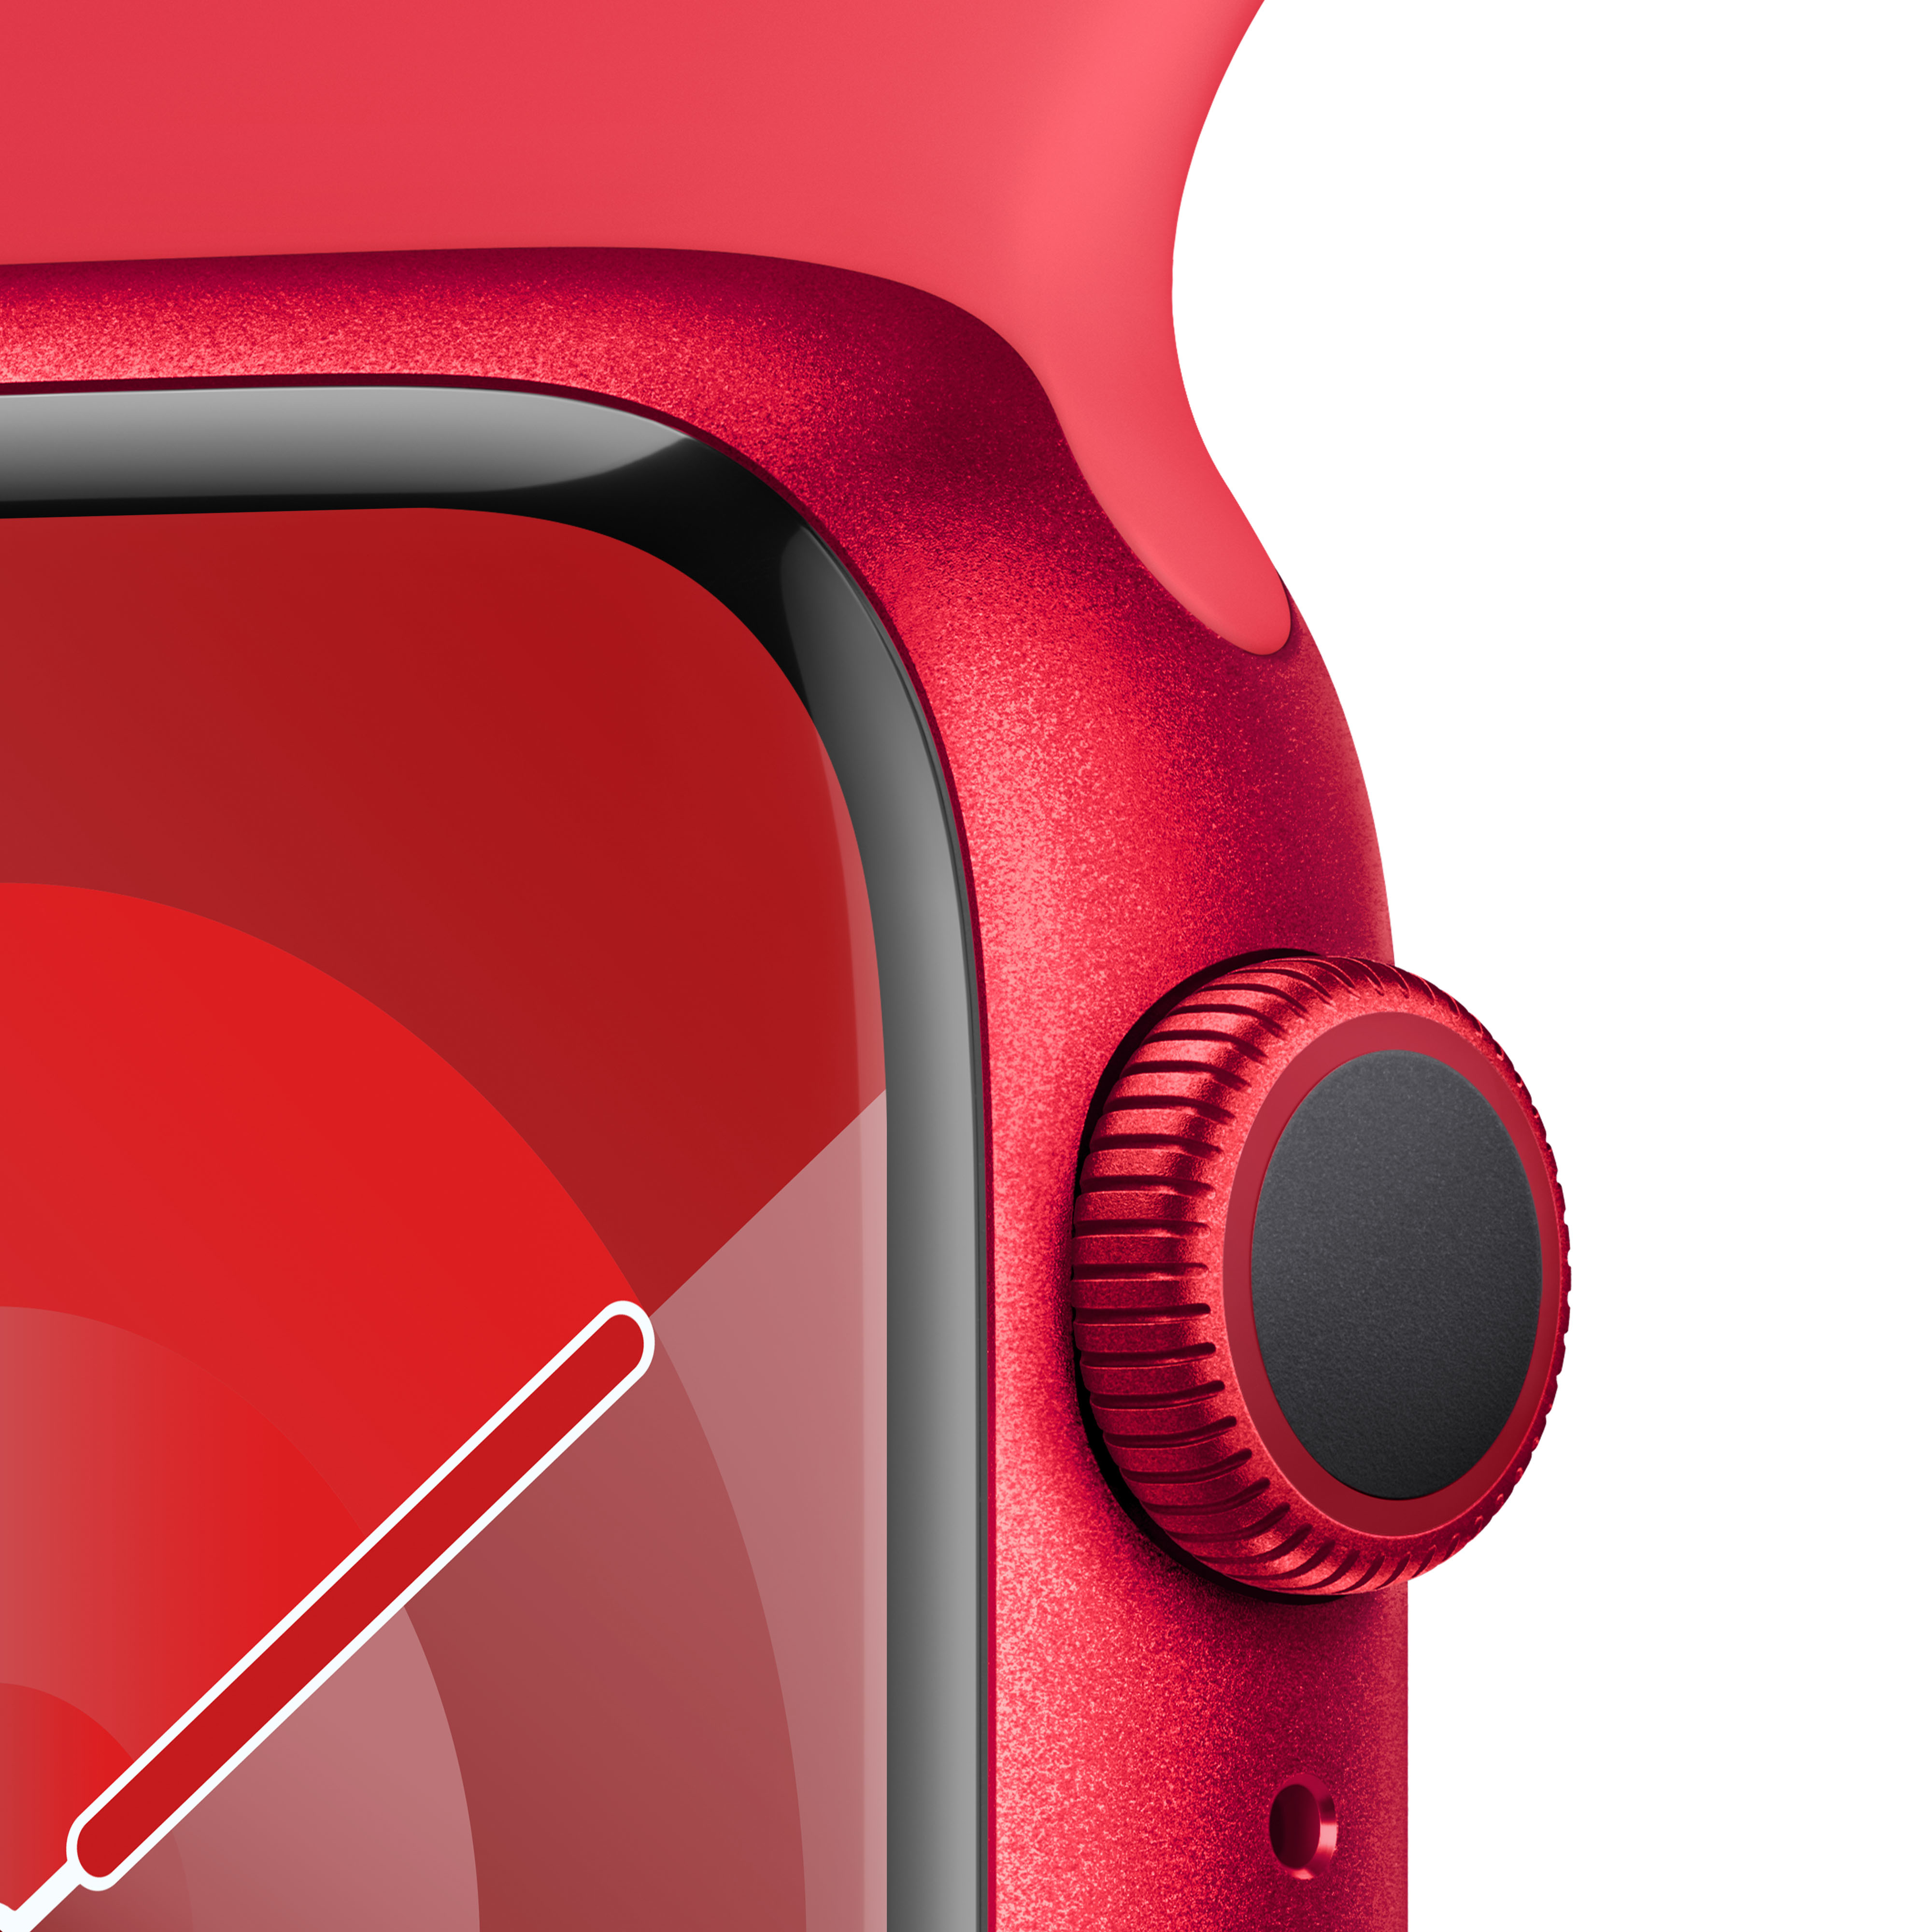 Apple - Reloj Smartwatch Apple Watch Series 9 GPS 41mm (PRODUCT)RED Aluminium Case con (PRODUCT)RED Sport Band  (S/M)